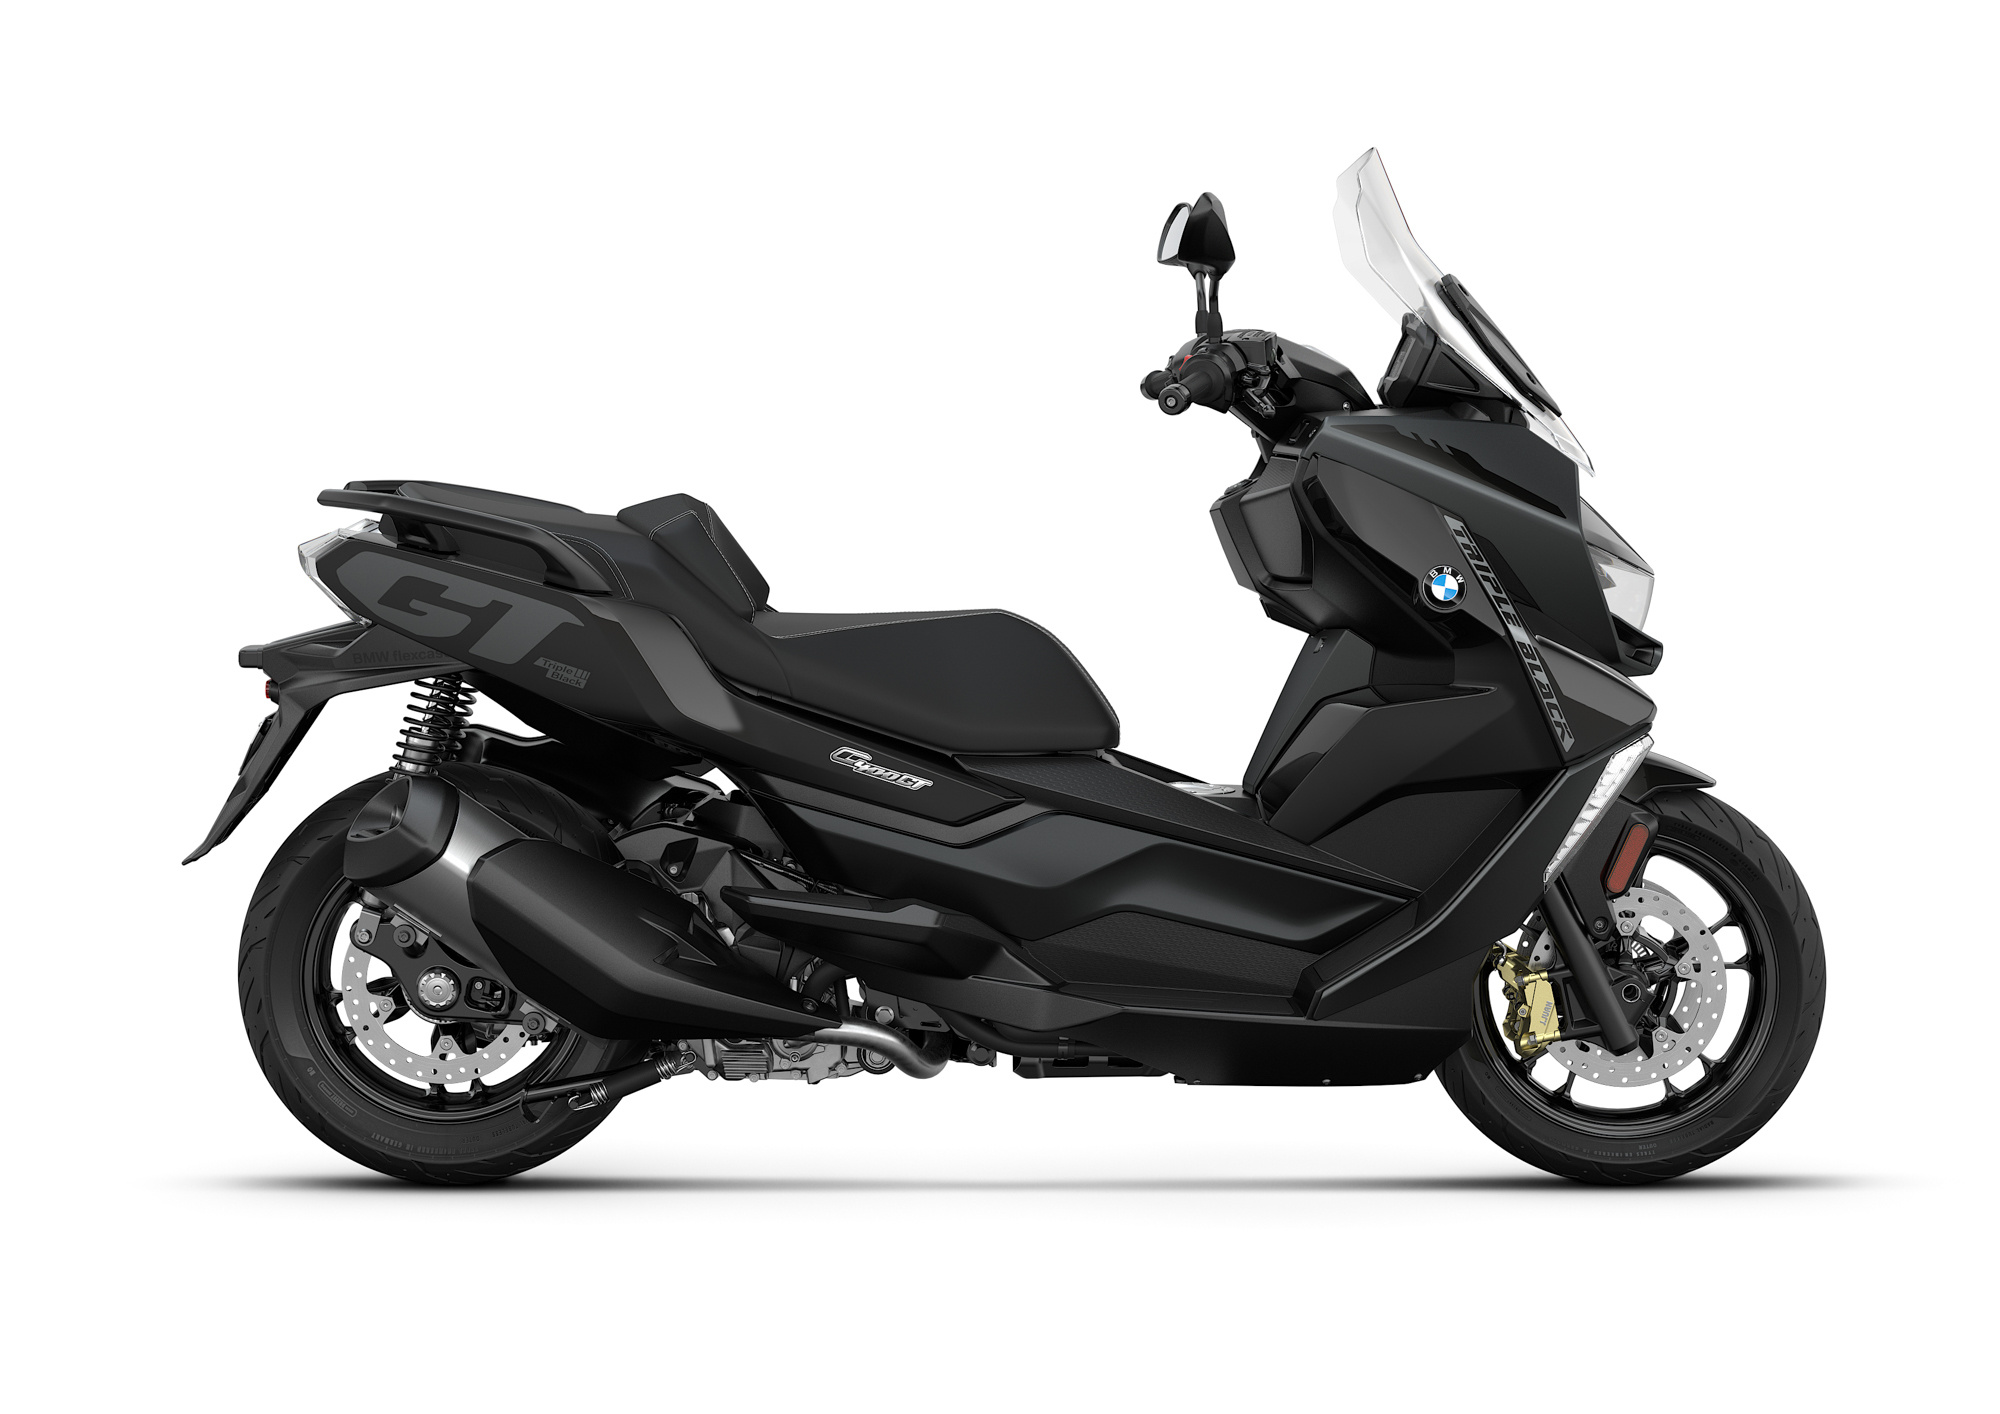 BMW C 400 GT, TopGear scooter review, Ultimate urban mobility, Unmatched versatility, 2000x1420 HD Desktop